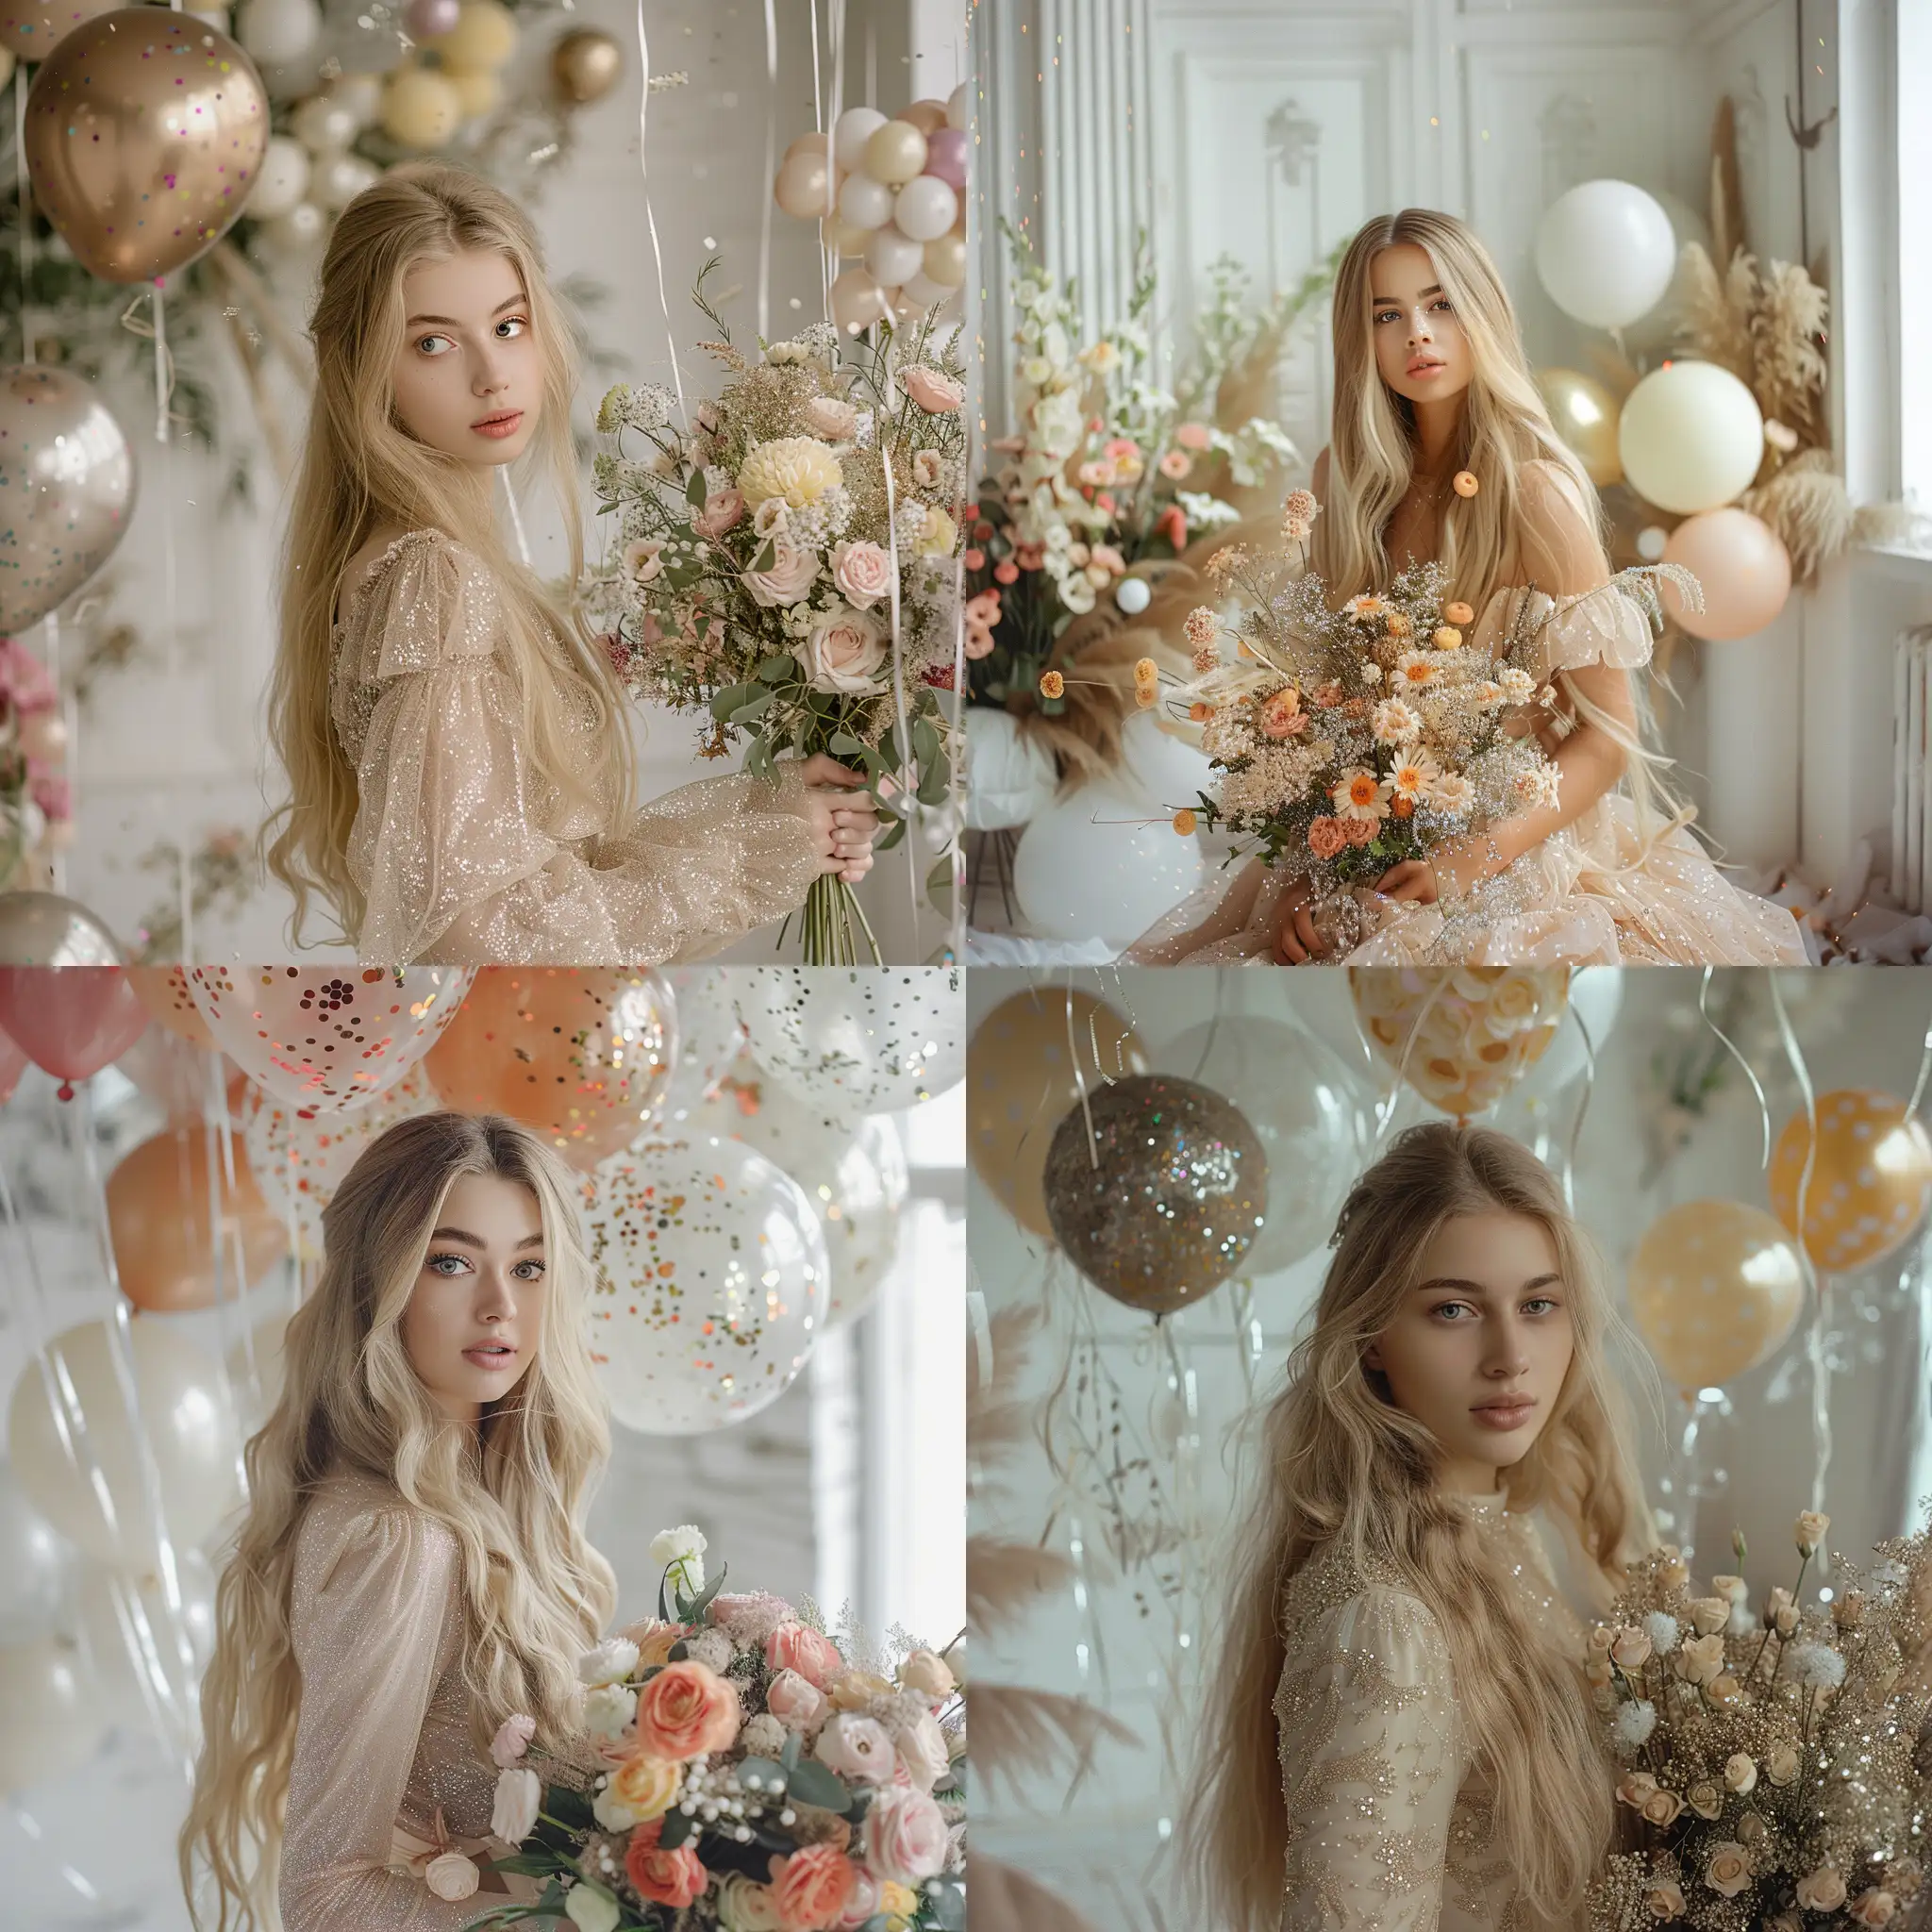 Young woman with blonde long hair in studio in a dress in a room with white walls in the hands of a lush bouquet of flowers. The room is decorated with glitter and balloons made of falsa realistic photo photo shoot girl looking at the camera face well seen detailing 